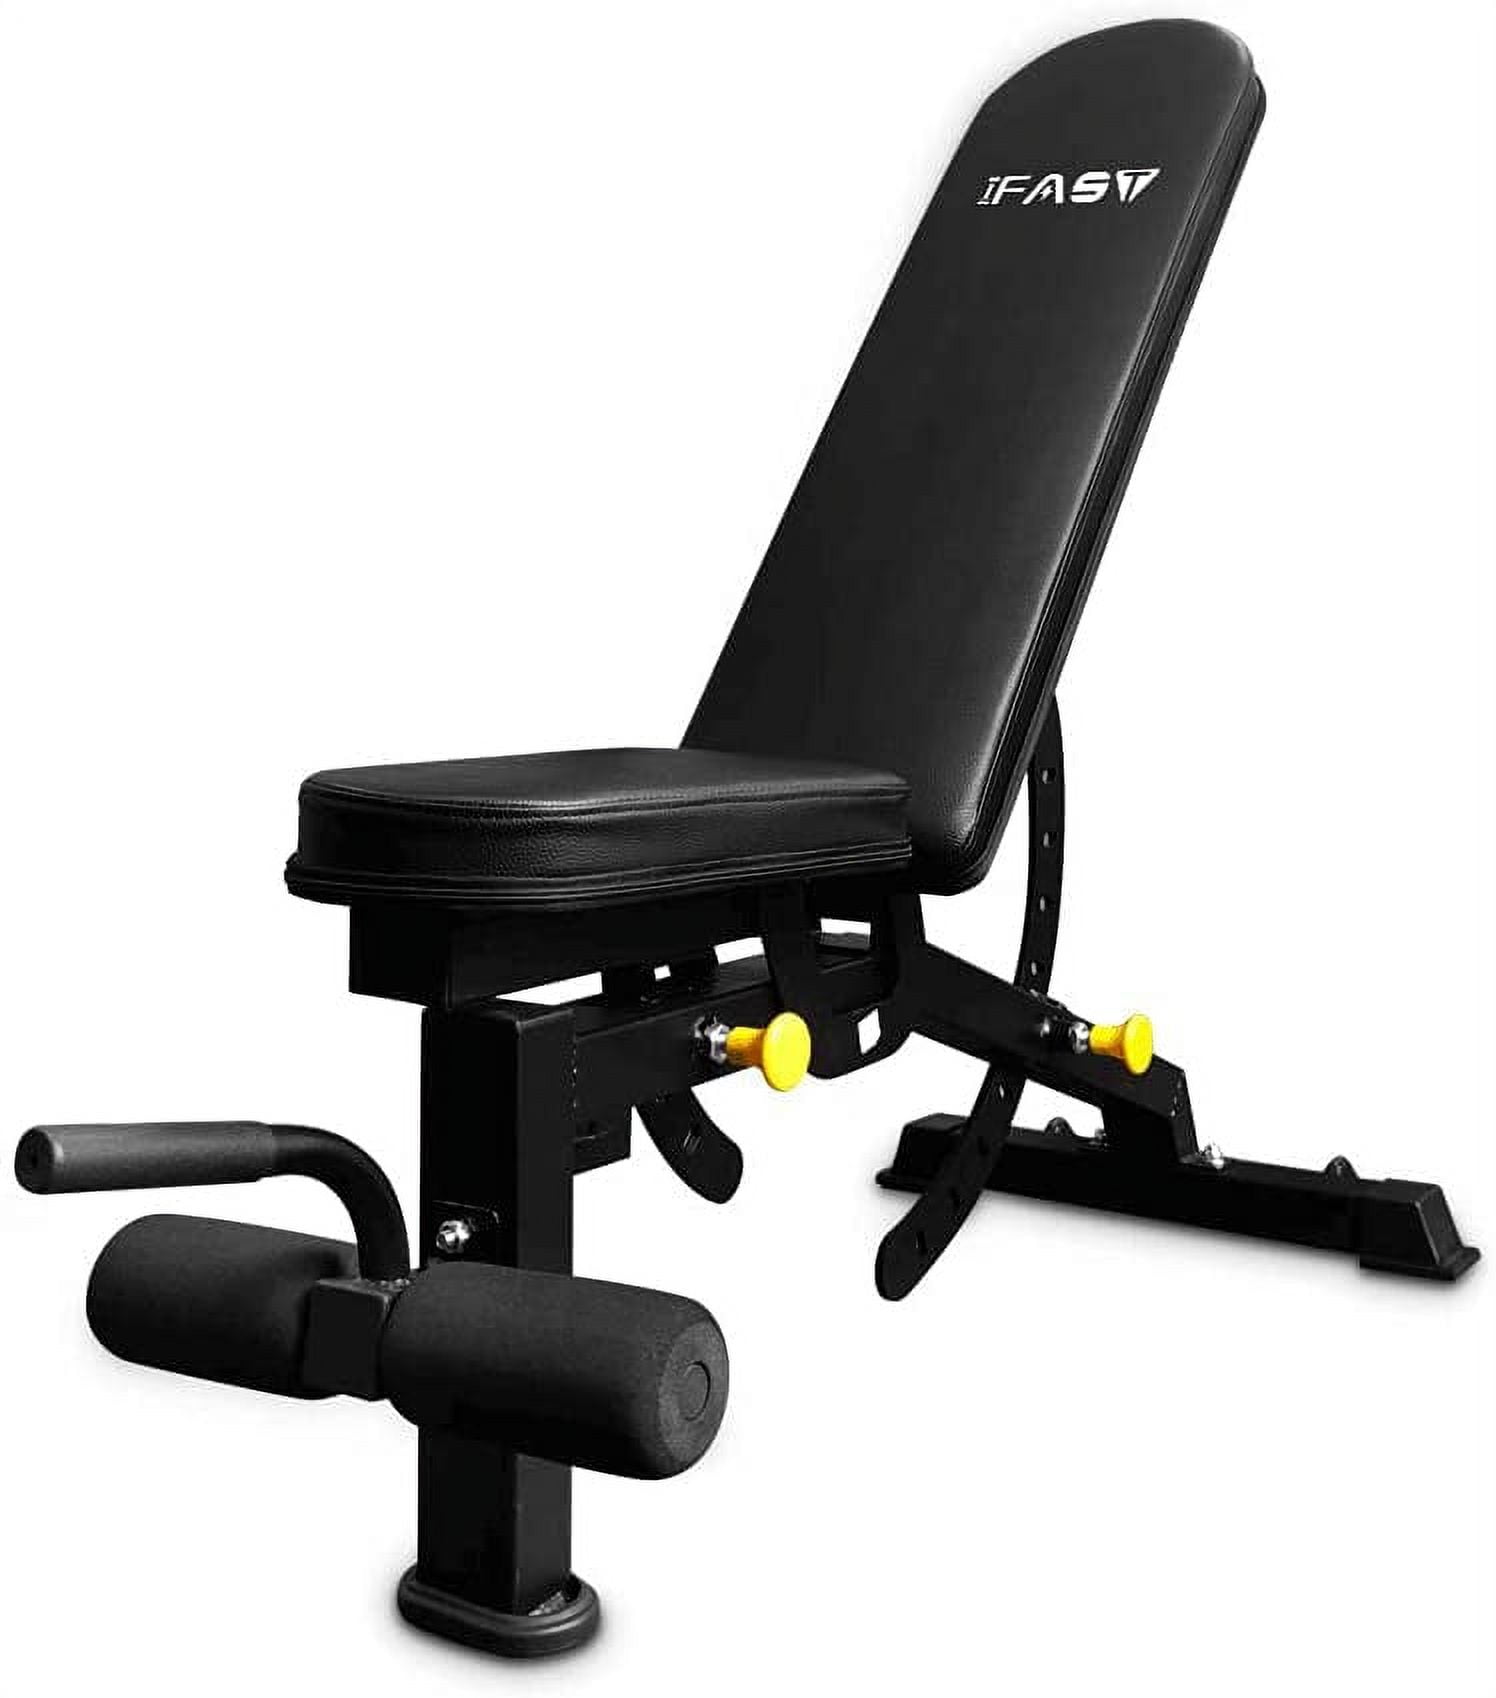 IFAST Adjustable Strength Training Bench Press Home Full Body